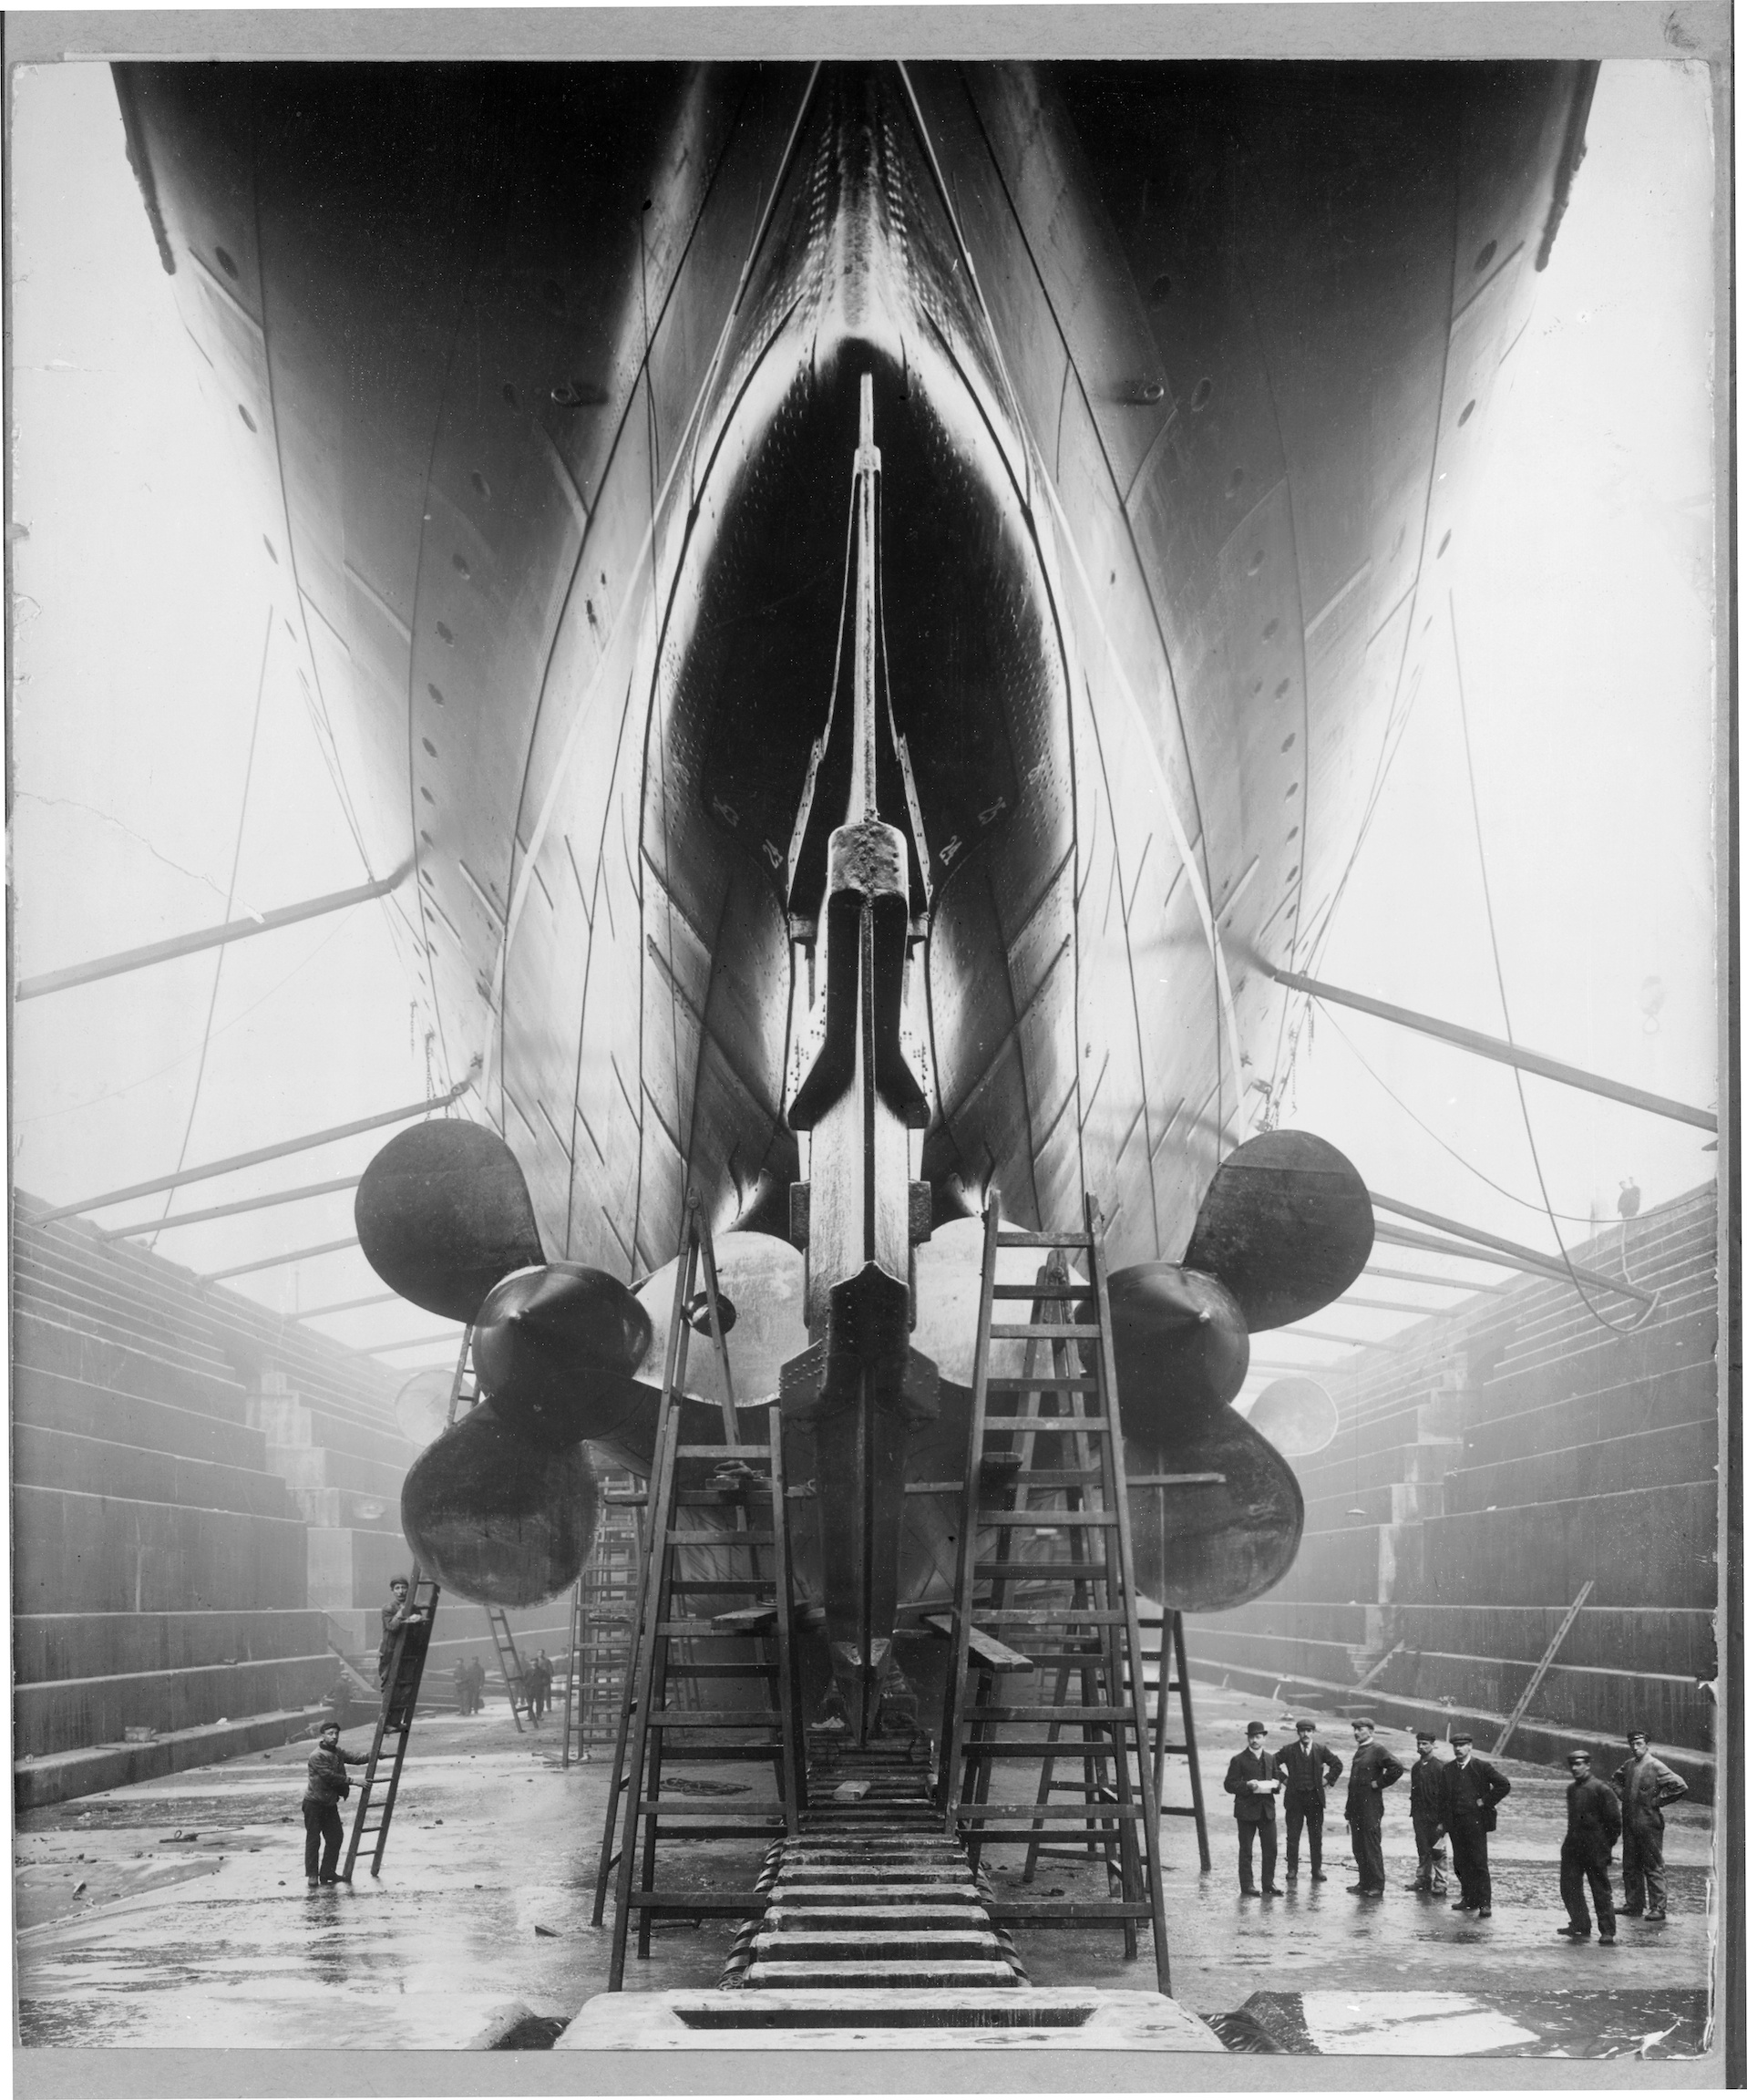 The Stern of the Lusitania